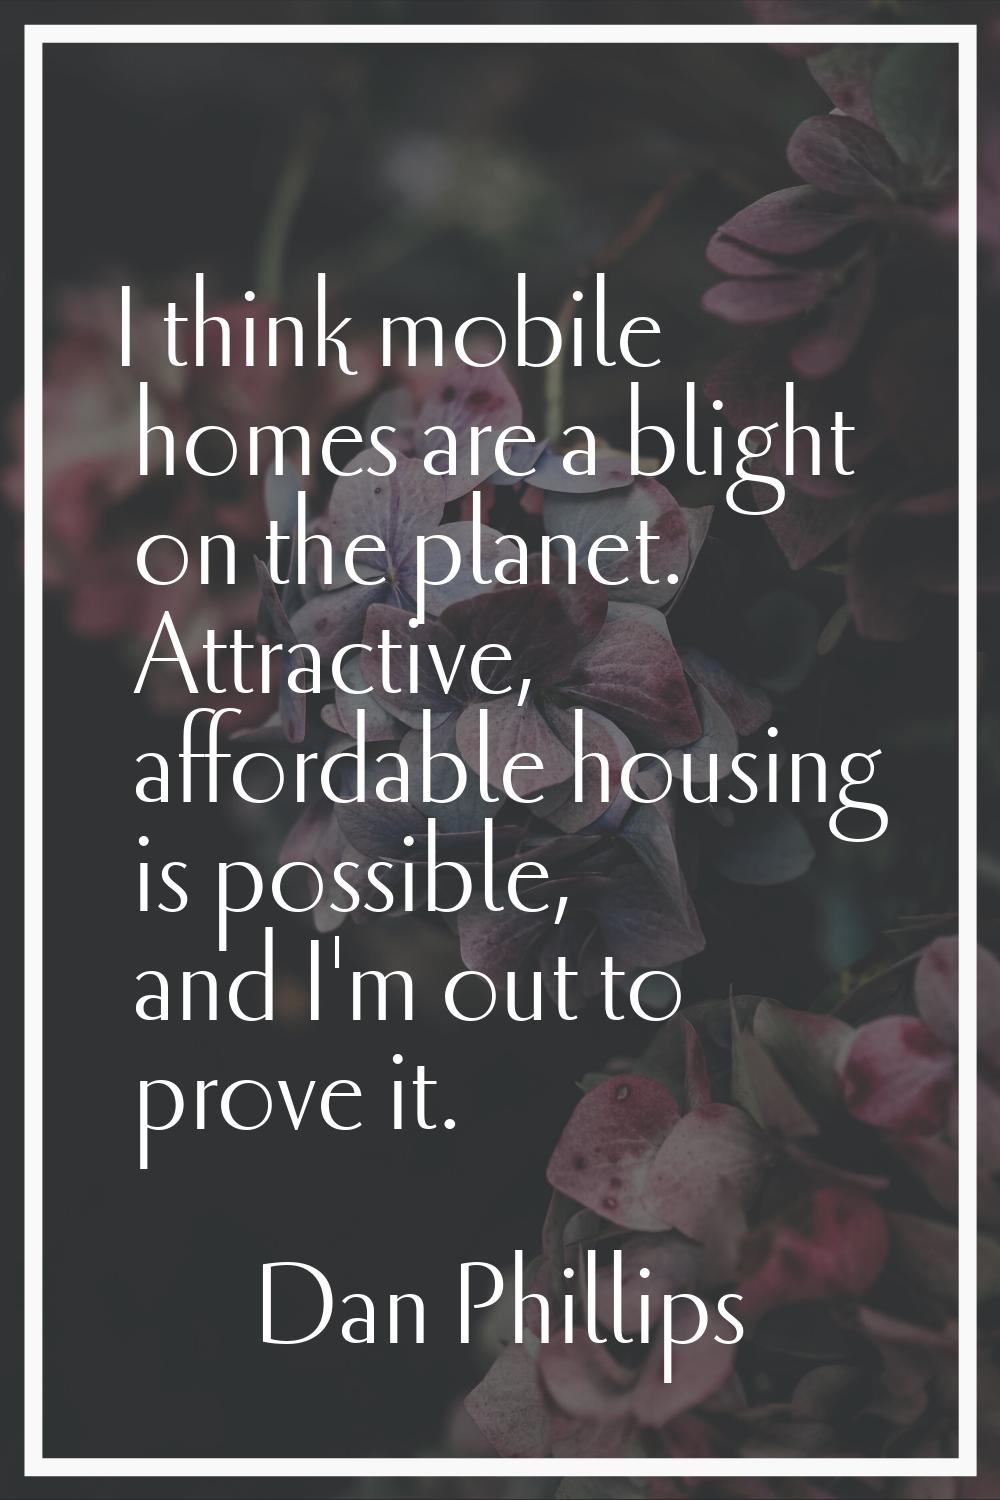 I think mobile homes are a blight on the planet. Attractive, affordable housing is possible, and I'